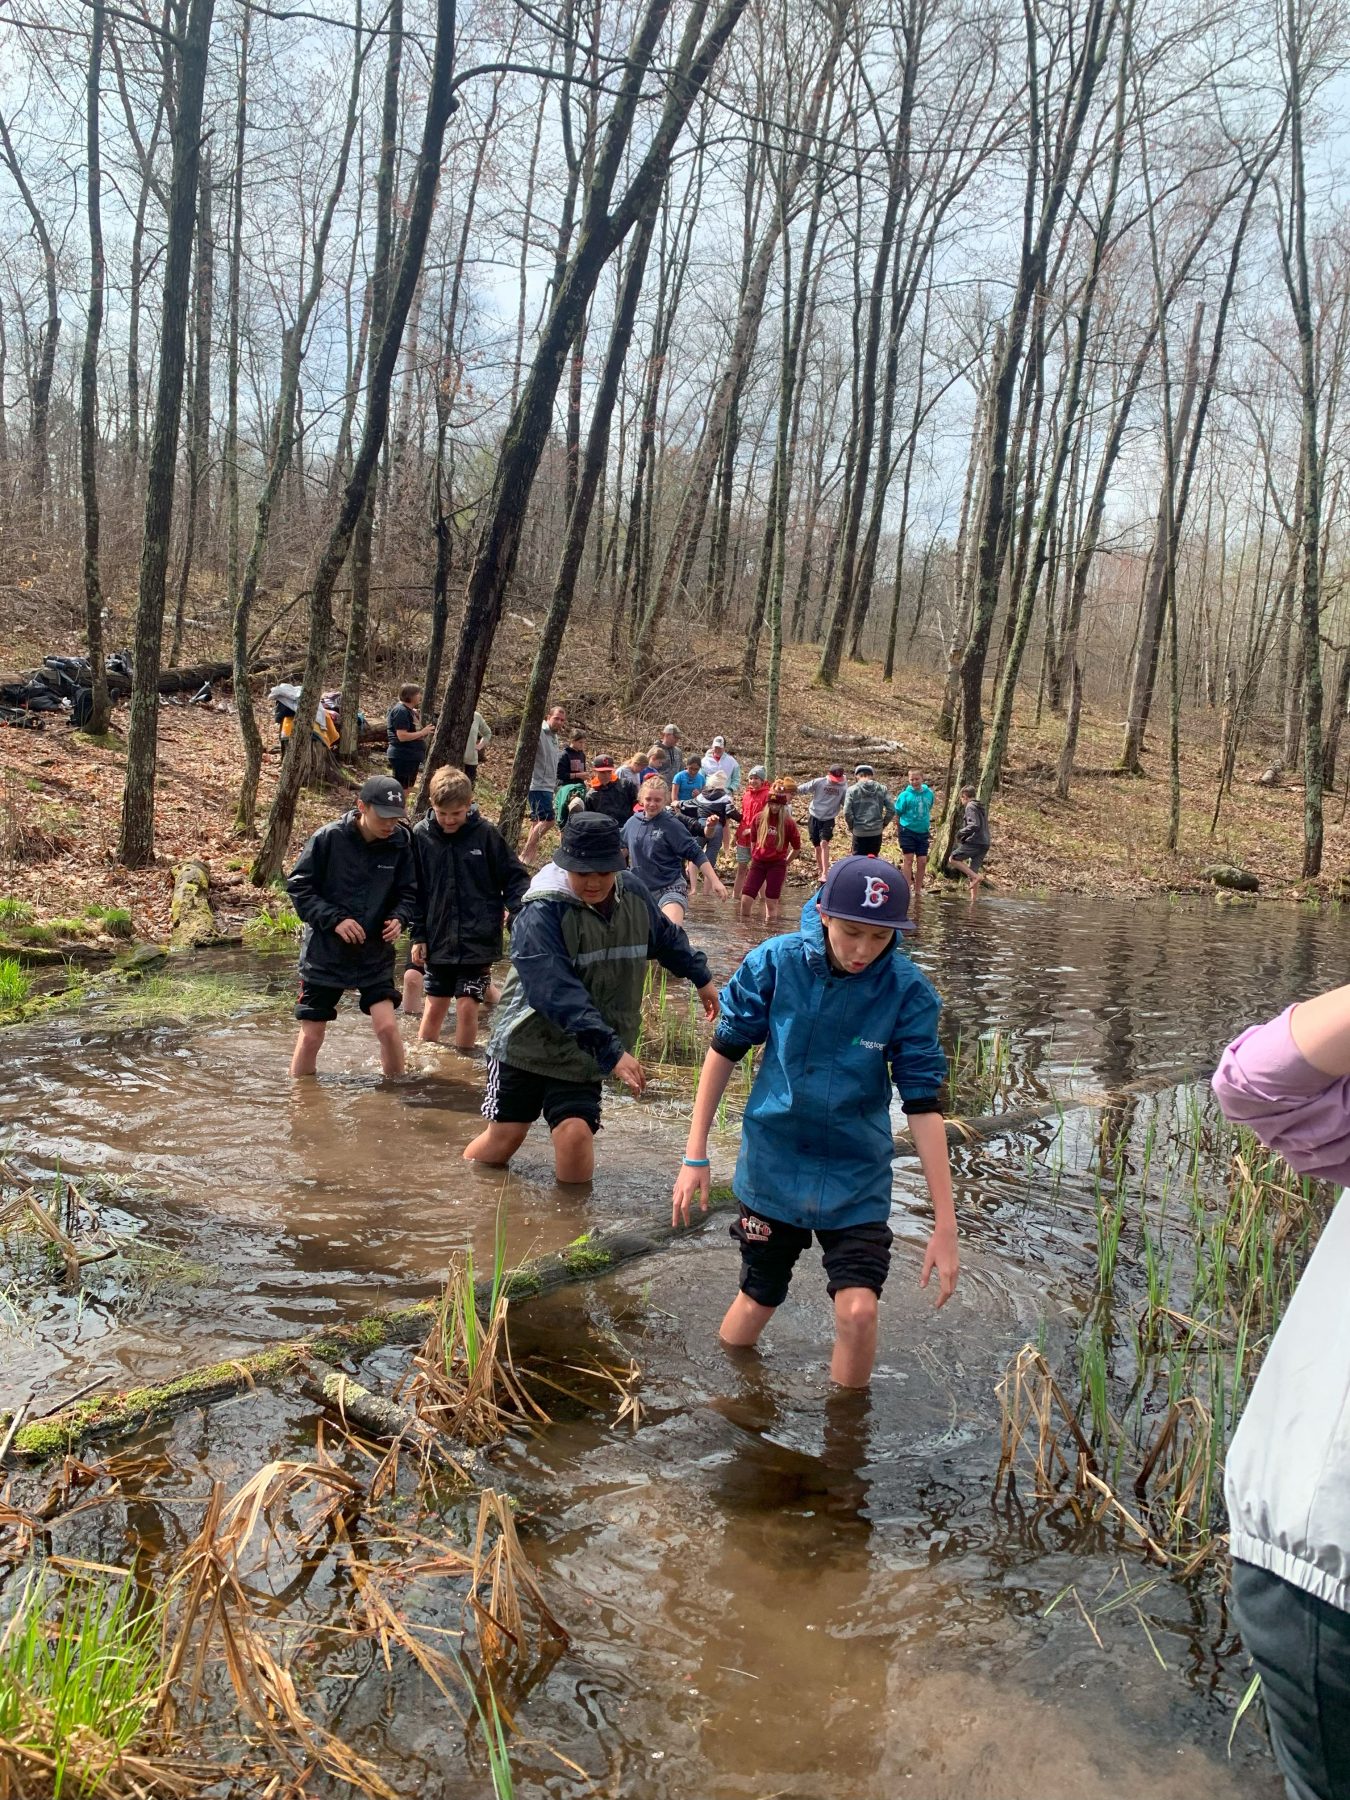 Campers walk through knee deep muddy water in a line in the woods of Camp Foley